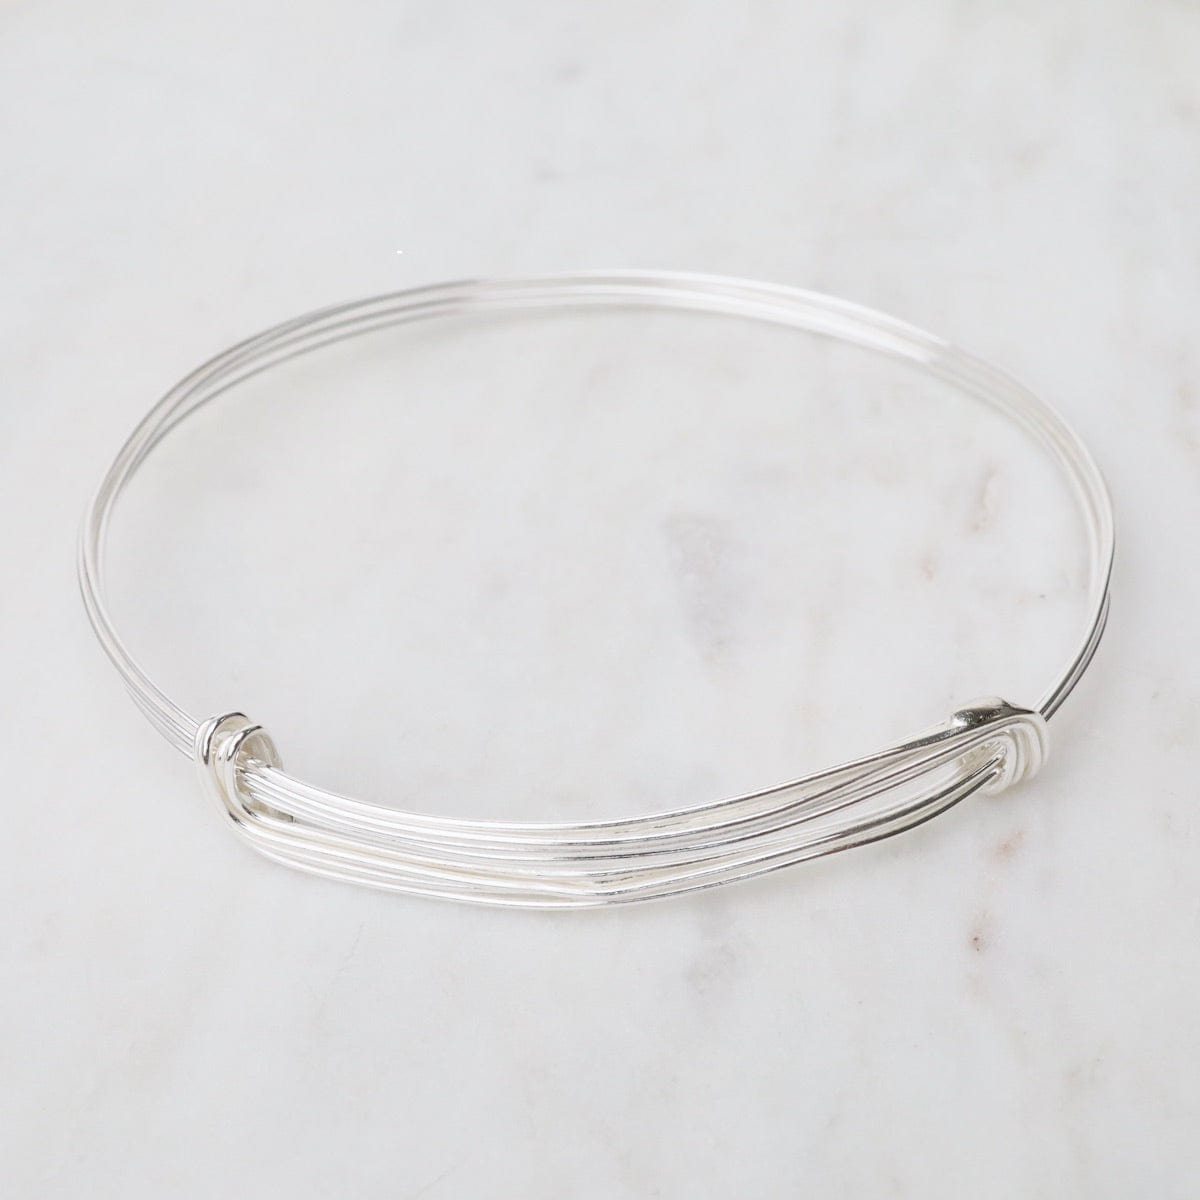 Two Knot, 5 Strand Elephant Hair Bangle in Sterling Silver – The Zuri  Collection